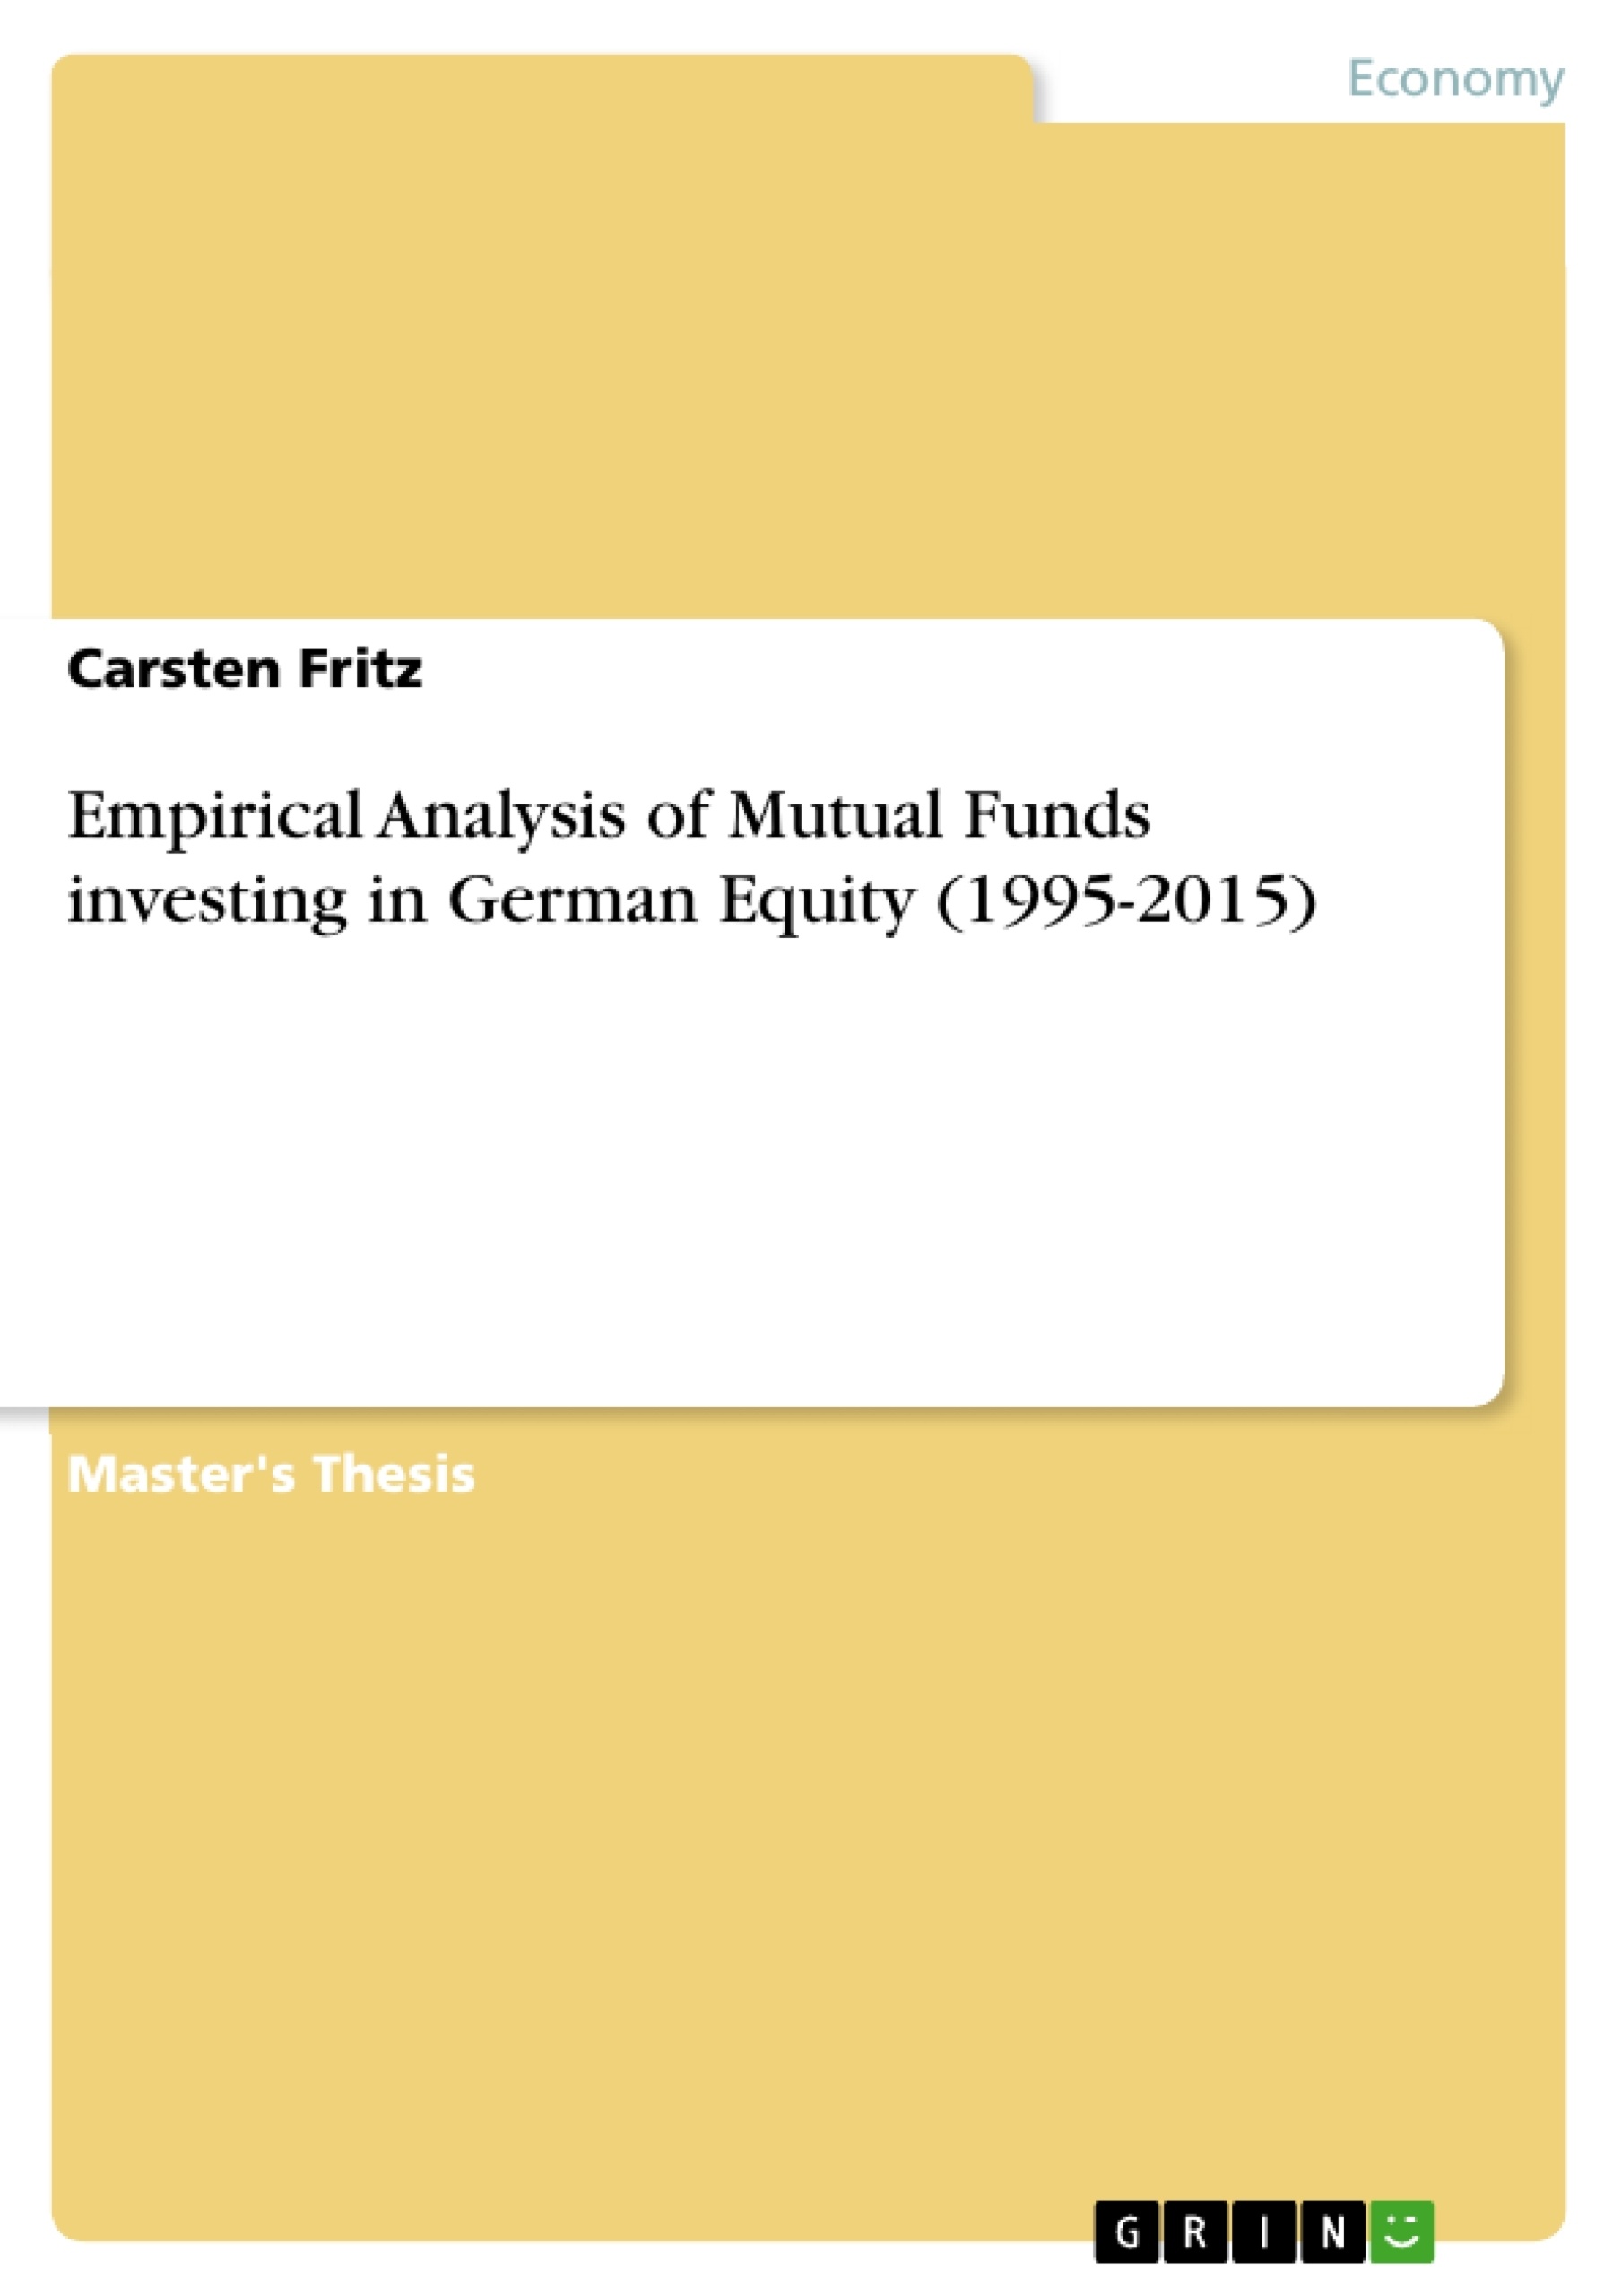 Titre: Empirical Analysis of Mutual Funds investing in German Equity (1995-2015)